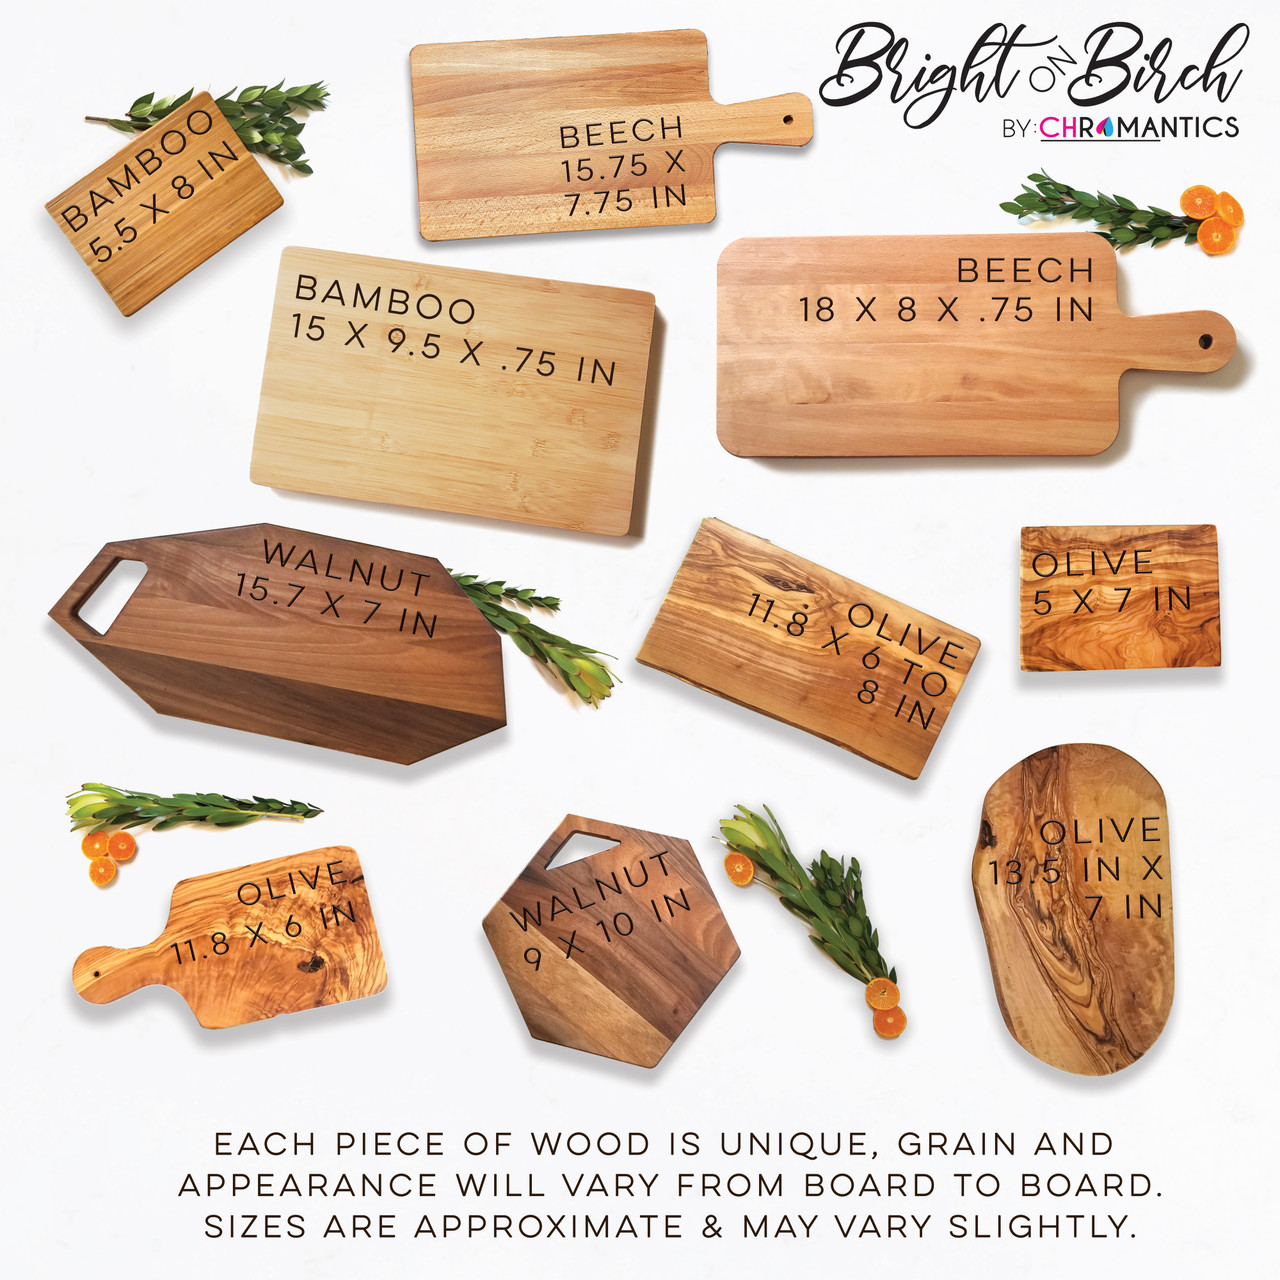 https://cdn11.bigcommerce.com/s-1ggeagg8hy/images/stencil/1280x1280/products/1074/3537/cutting-board-options-bob__69541.1651086608.jpg?c=2?imbypass=on